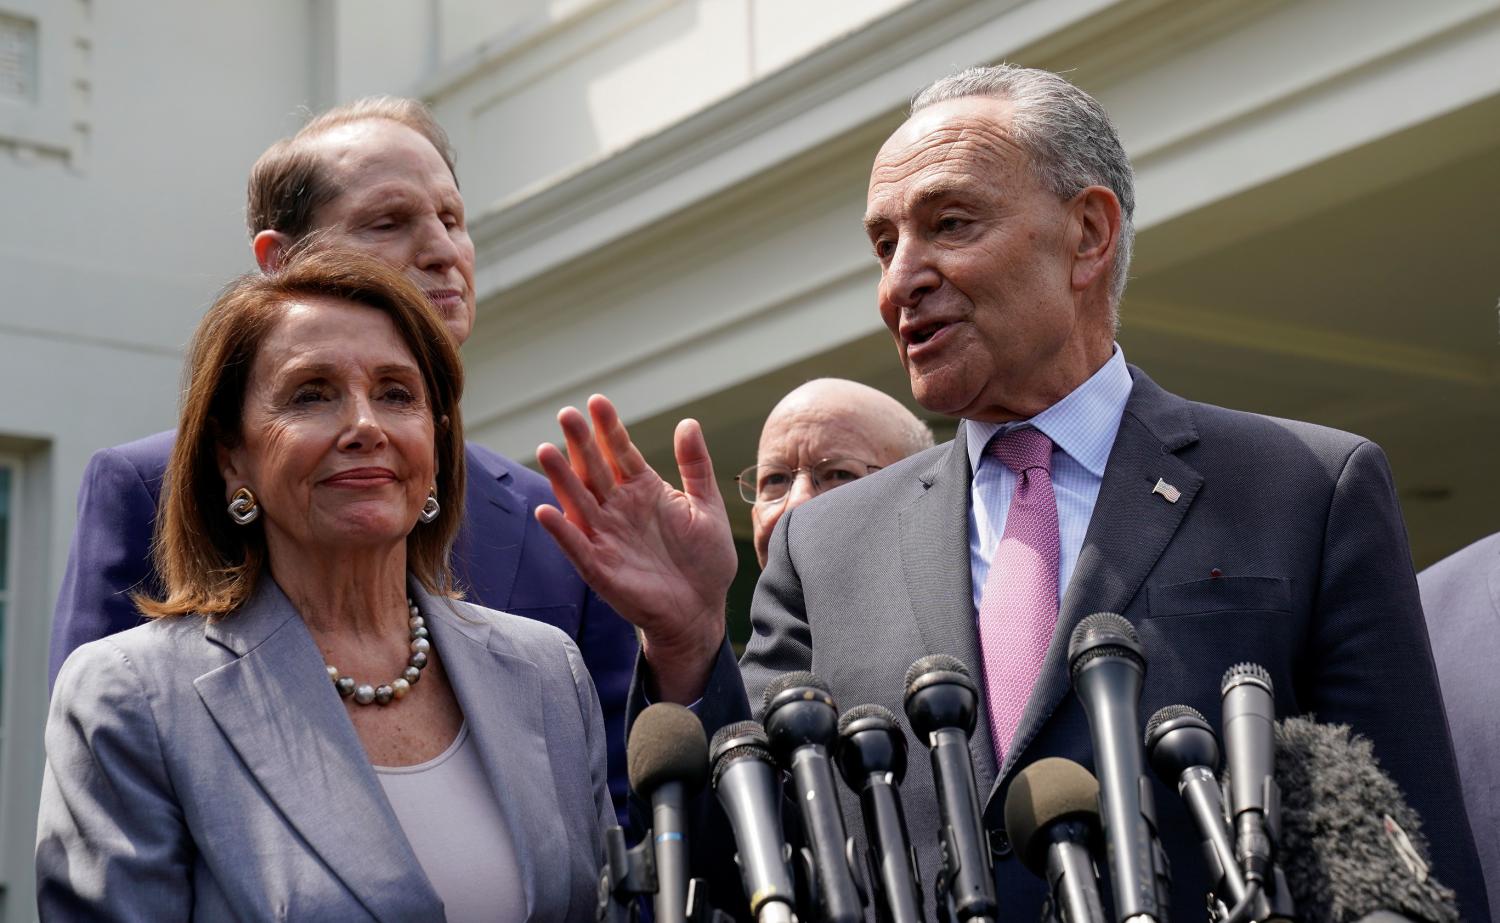 U.S. House Speaker Nancy Pelosi and Senate Democratic Leader Chuck Schumer speak to reporters after their meeting on infrastructure with U.S. President Donald Trump, at the White House in Washington, U.S., April 29, 2019.  REUTERS/Kevin Lamarque - RC151F7F92D0